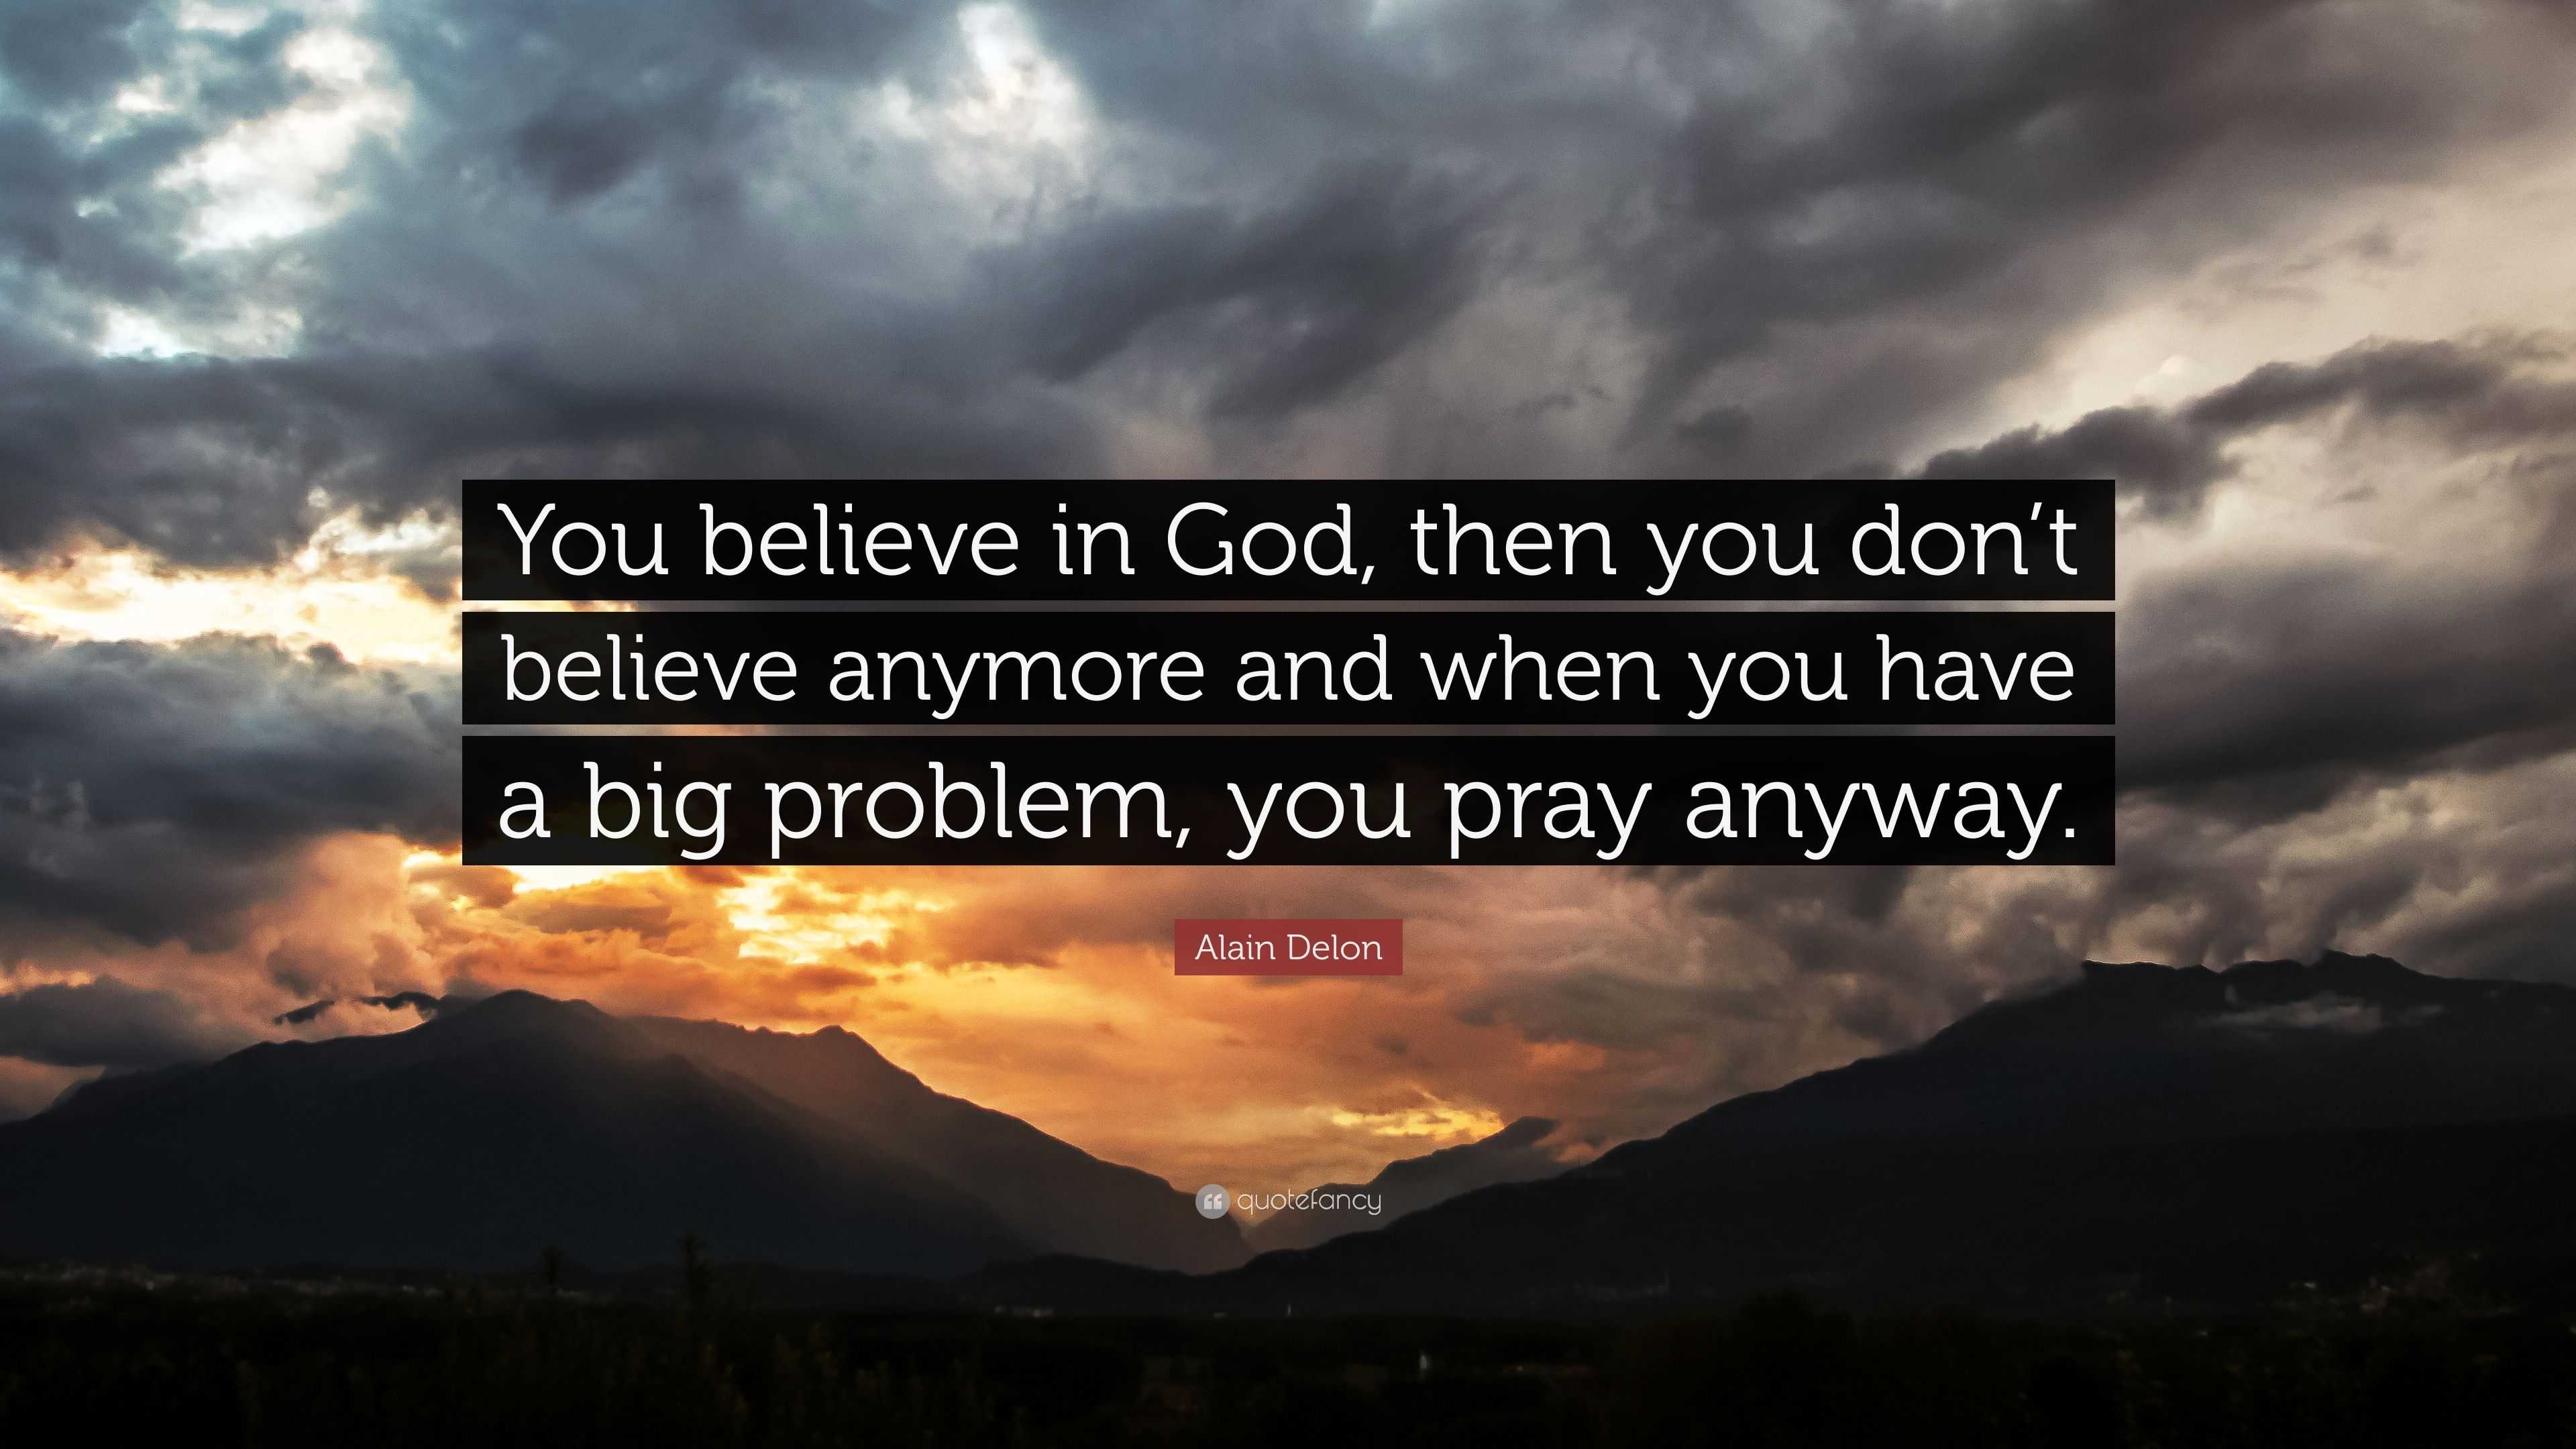 Alain Delon Quote: “You believe in God, then you don’t believe anymore ...